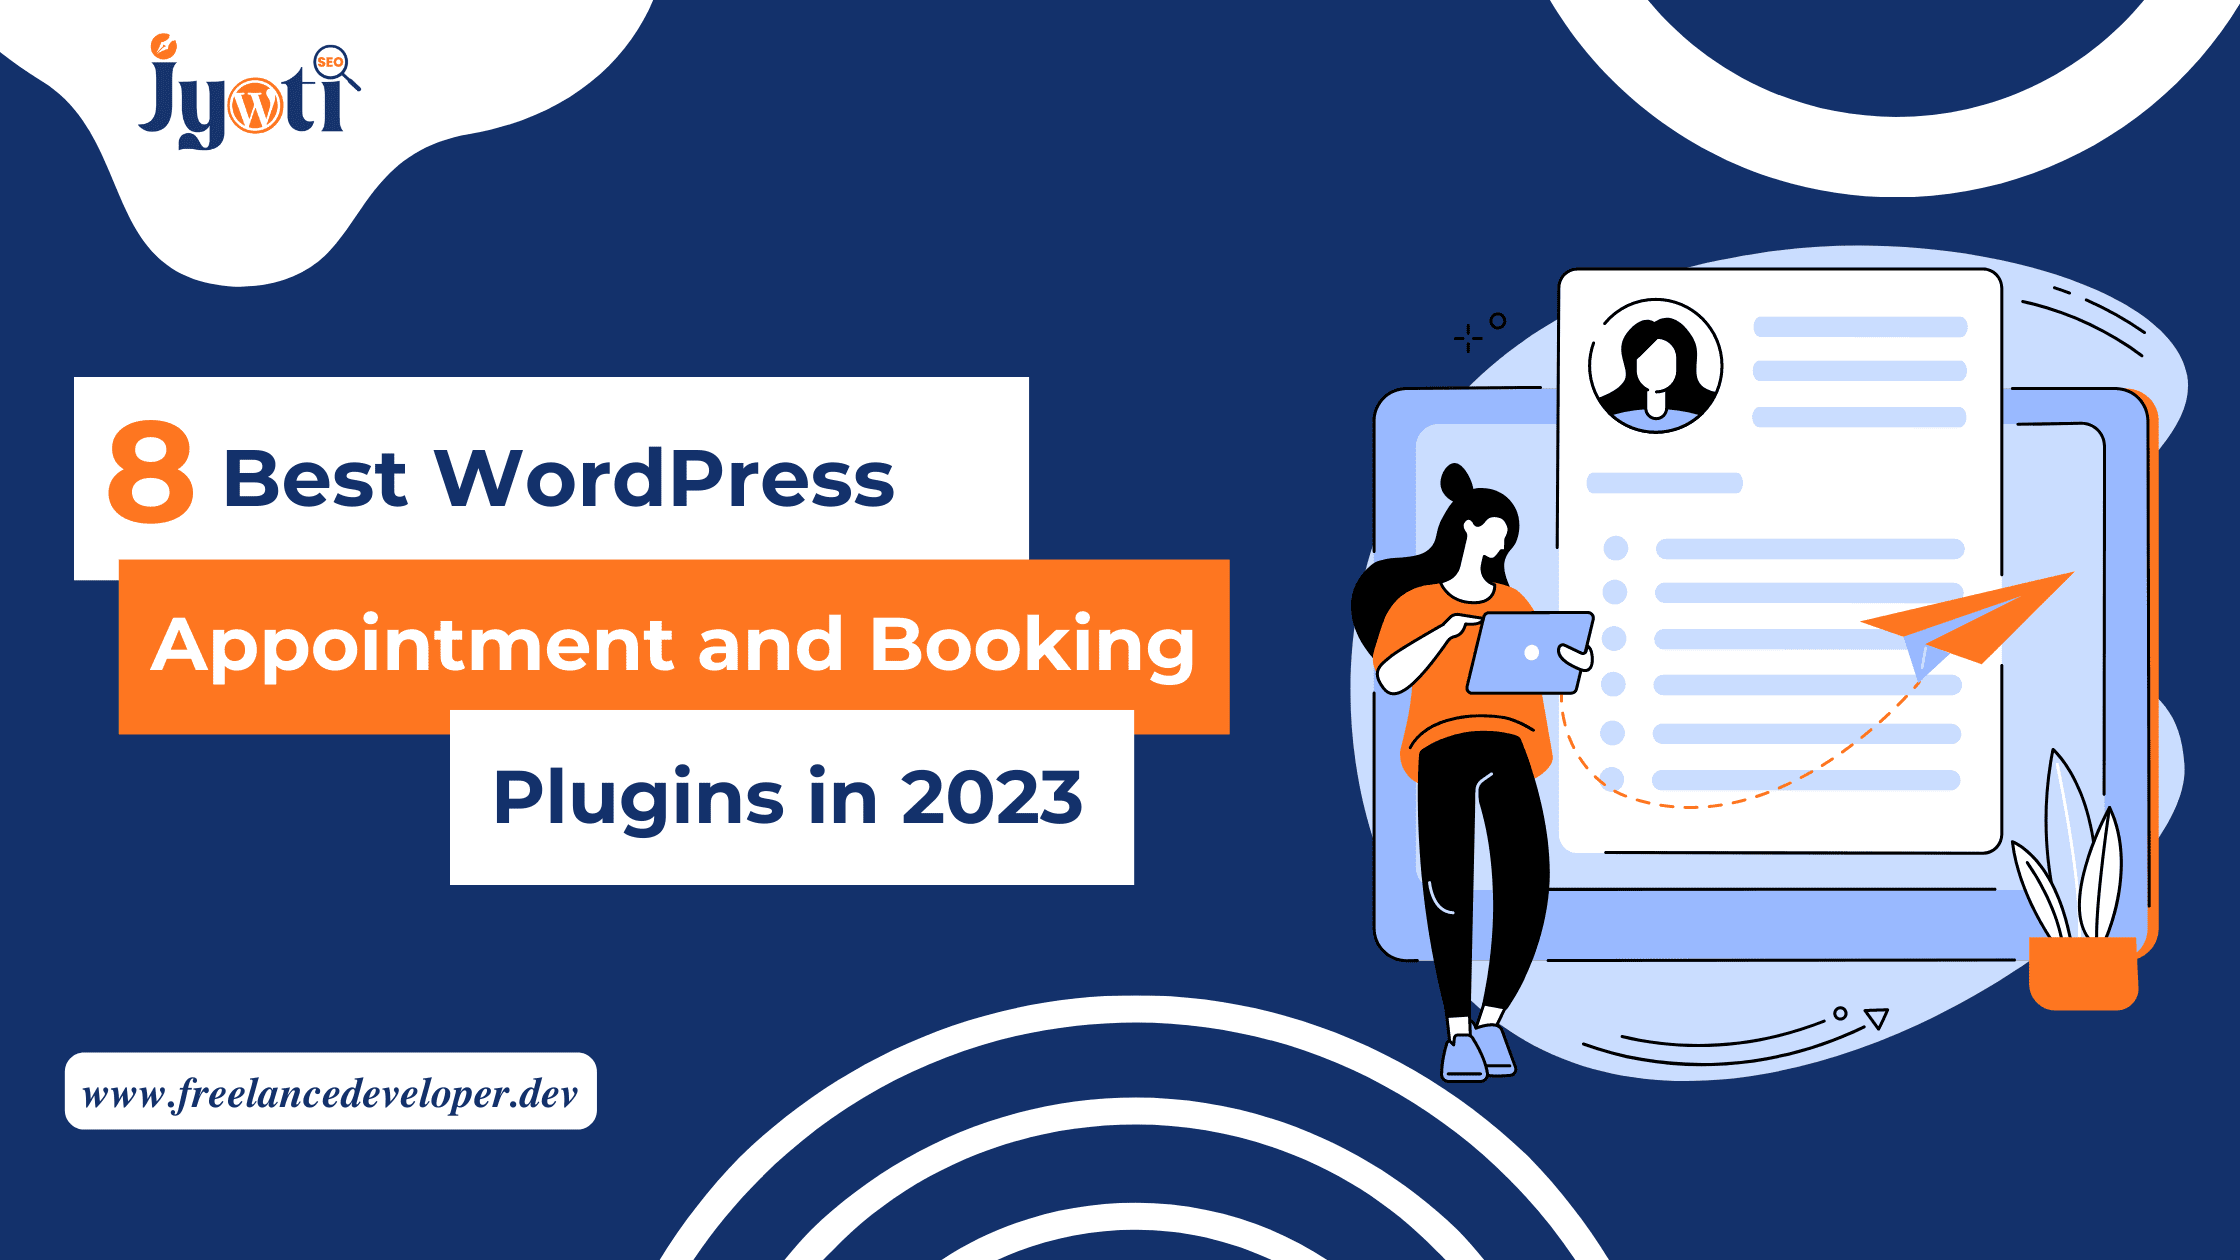 8 Best WordPress Appointment and Booking Plugins in 2023